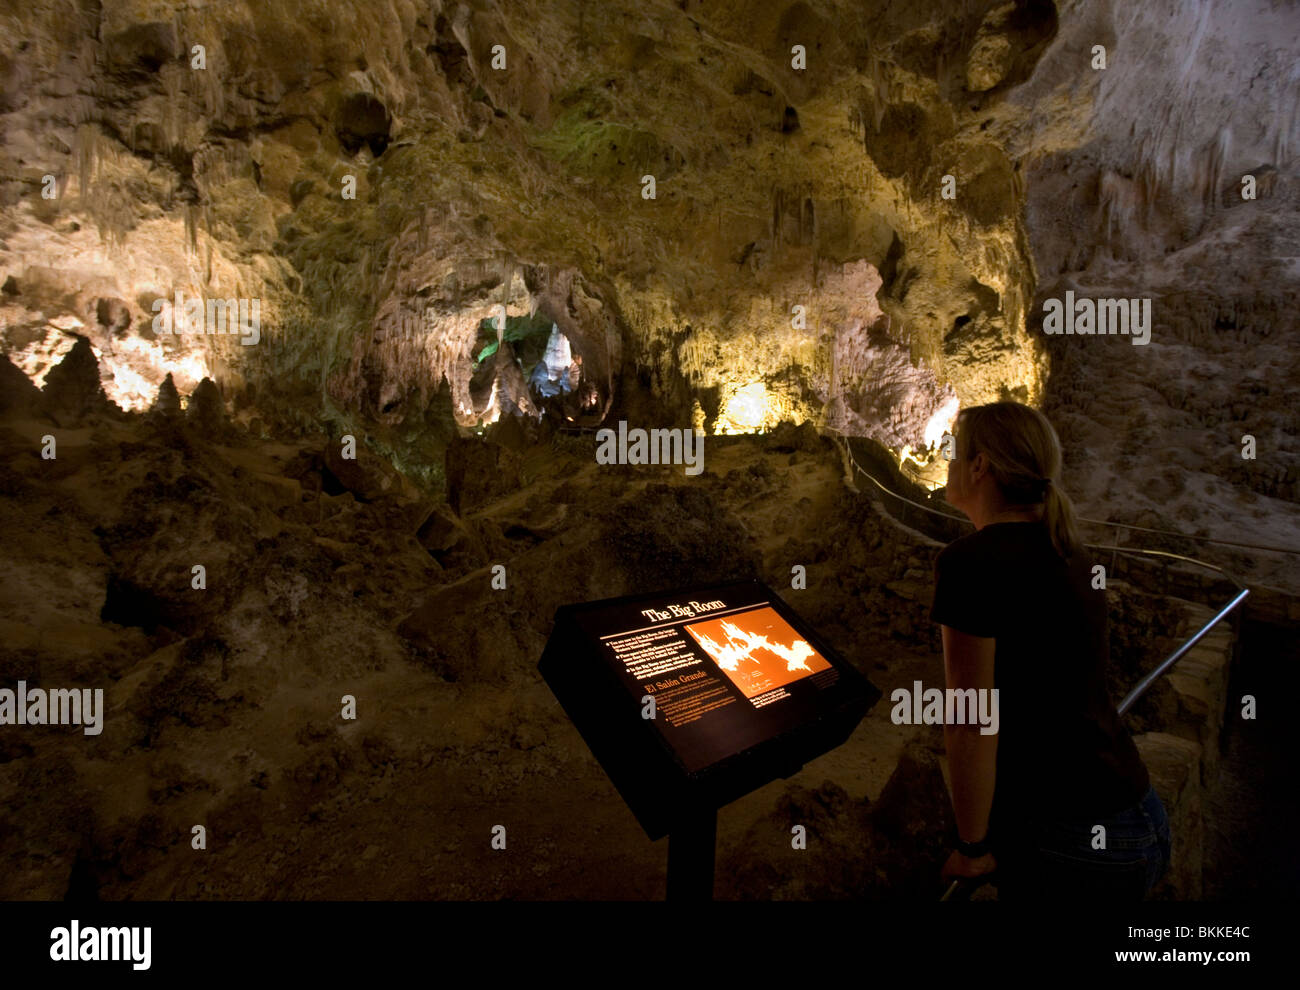 The Big Room inside Carlsbad Caverns is the largest known natural chamber in the western hemisphere. Stock Photo